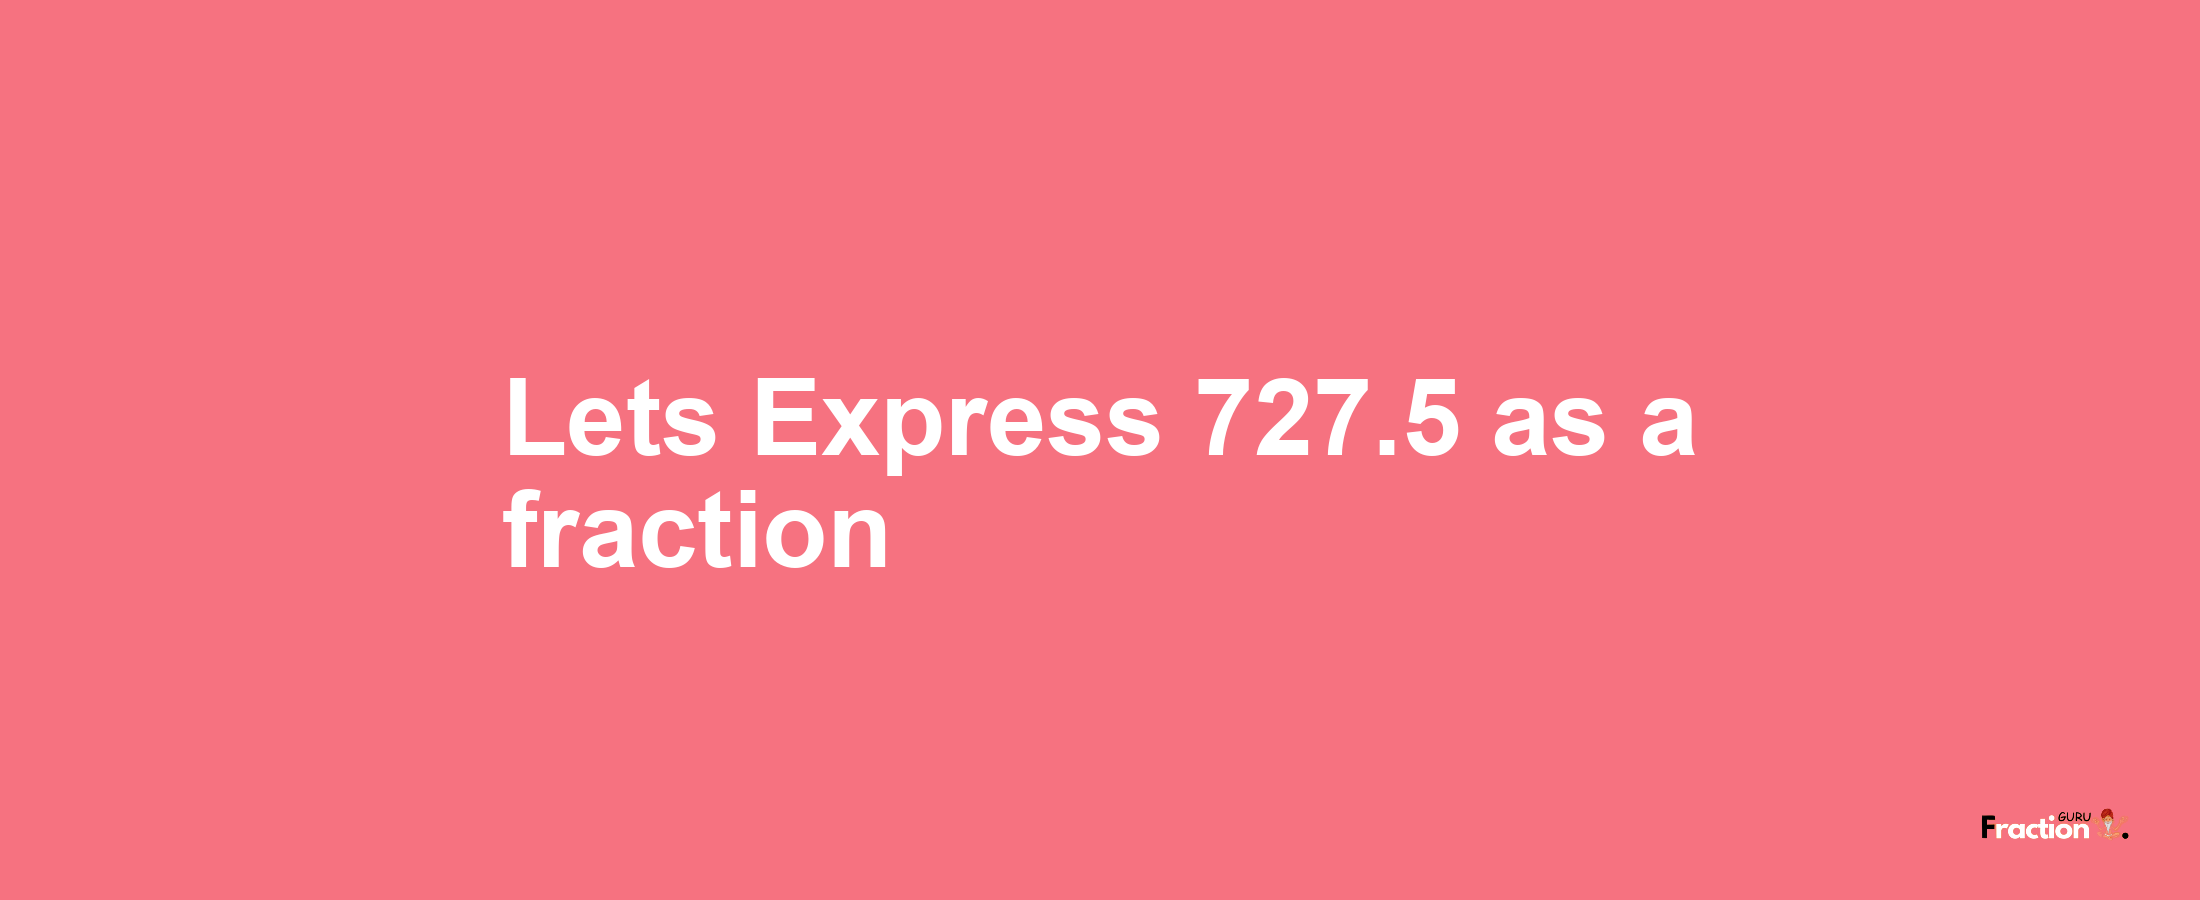 Lets Express 727.5 as afraction